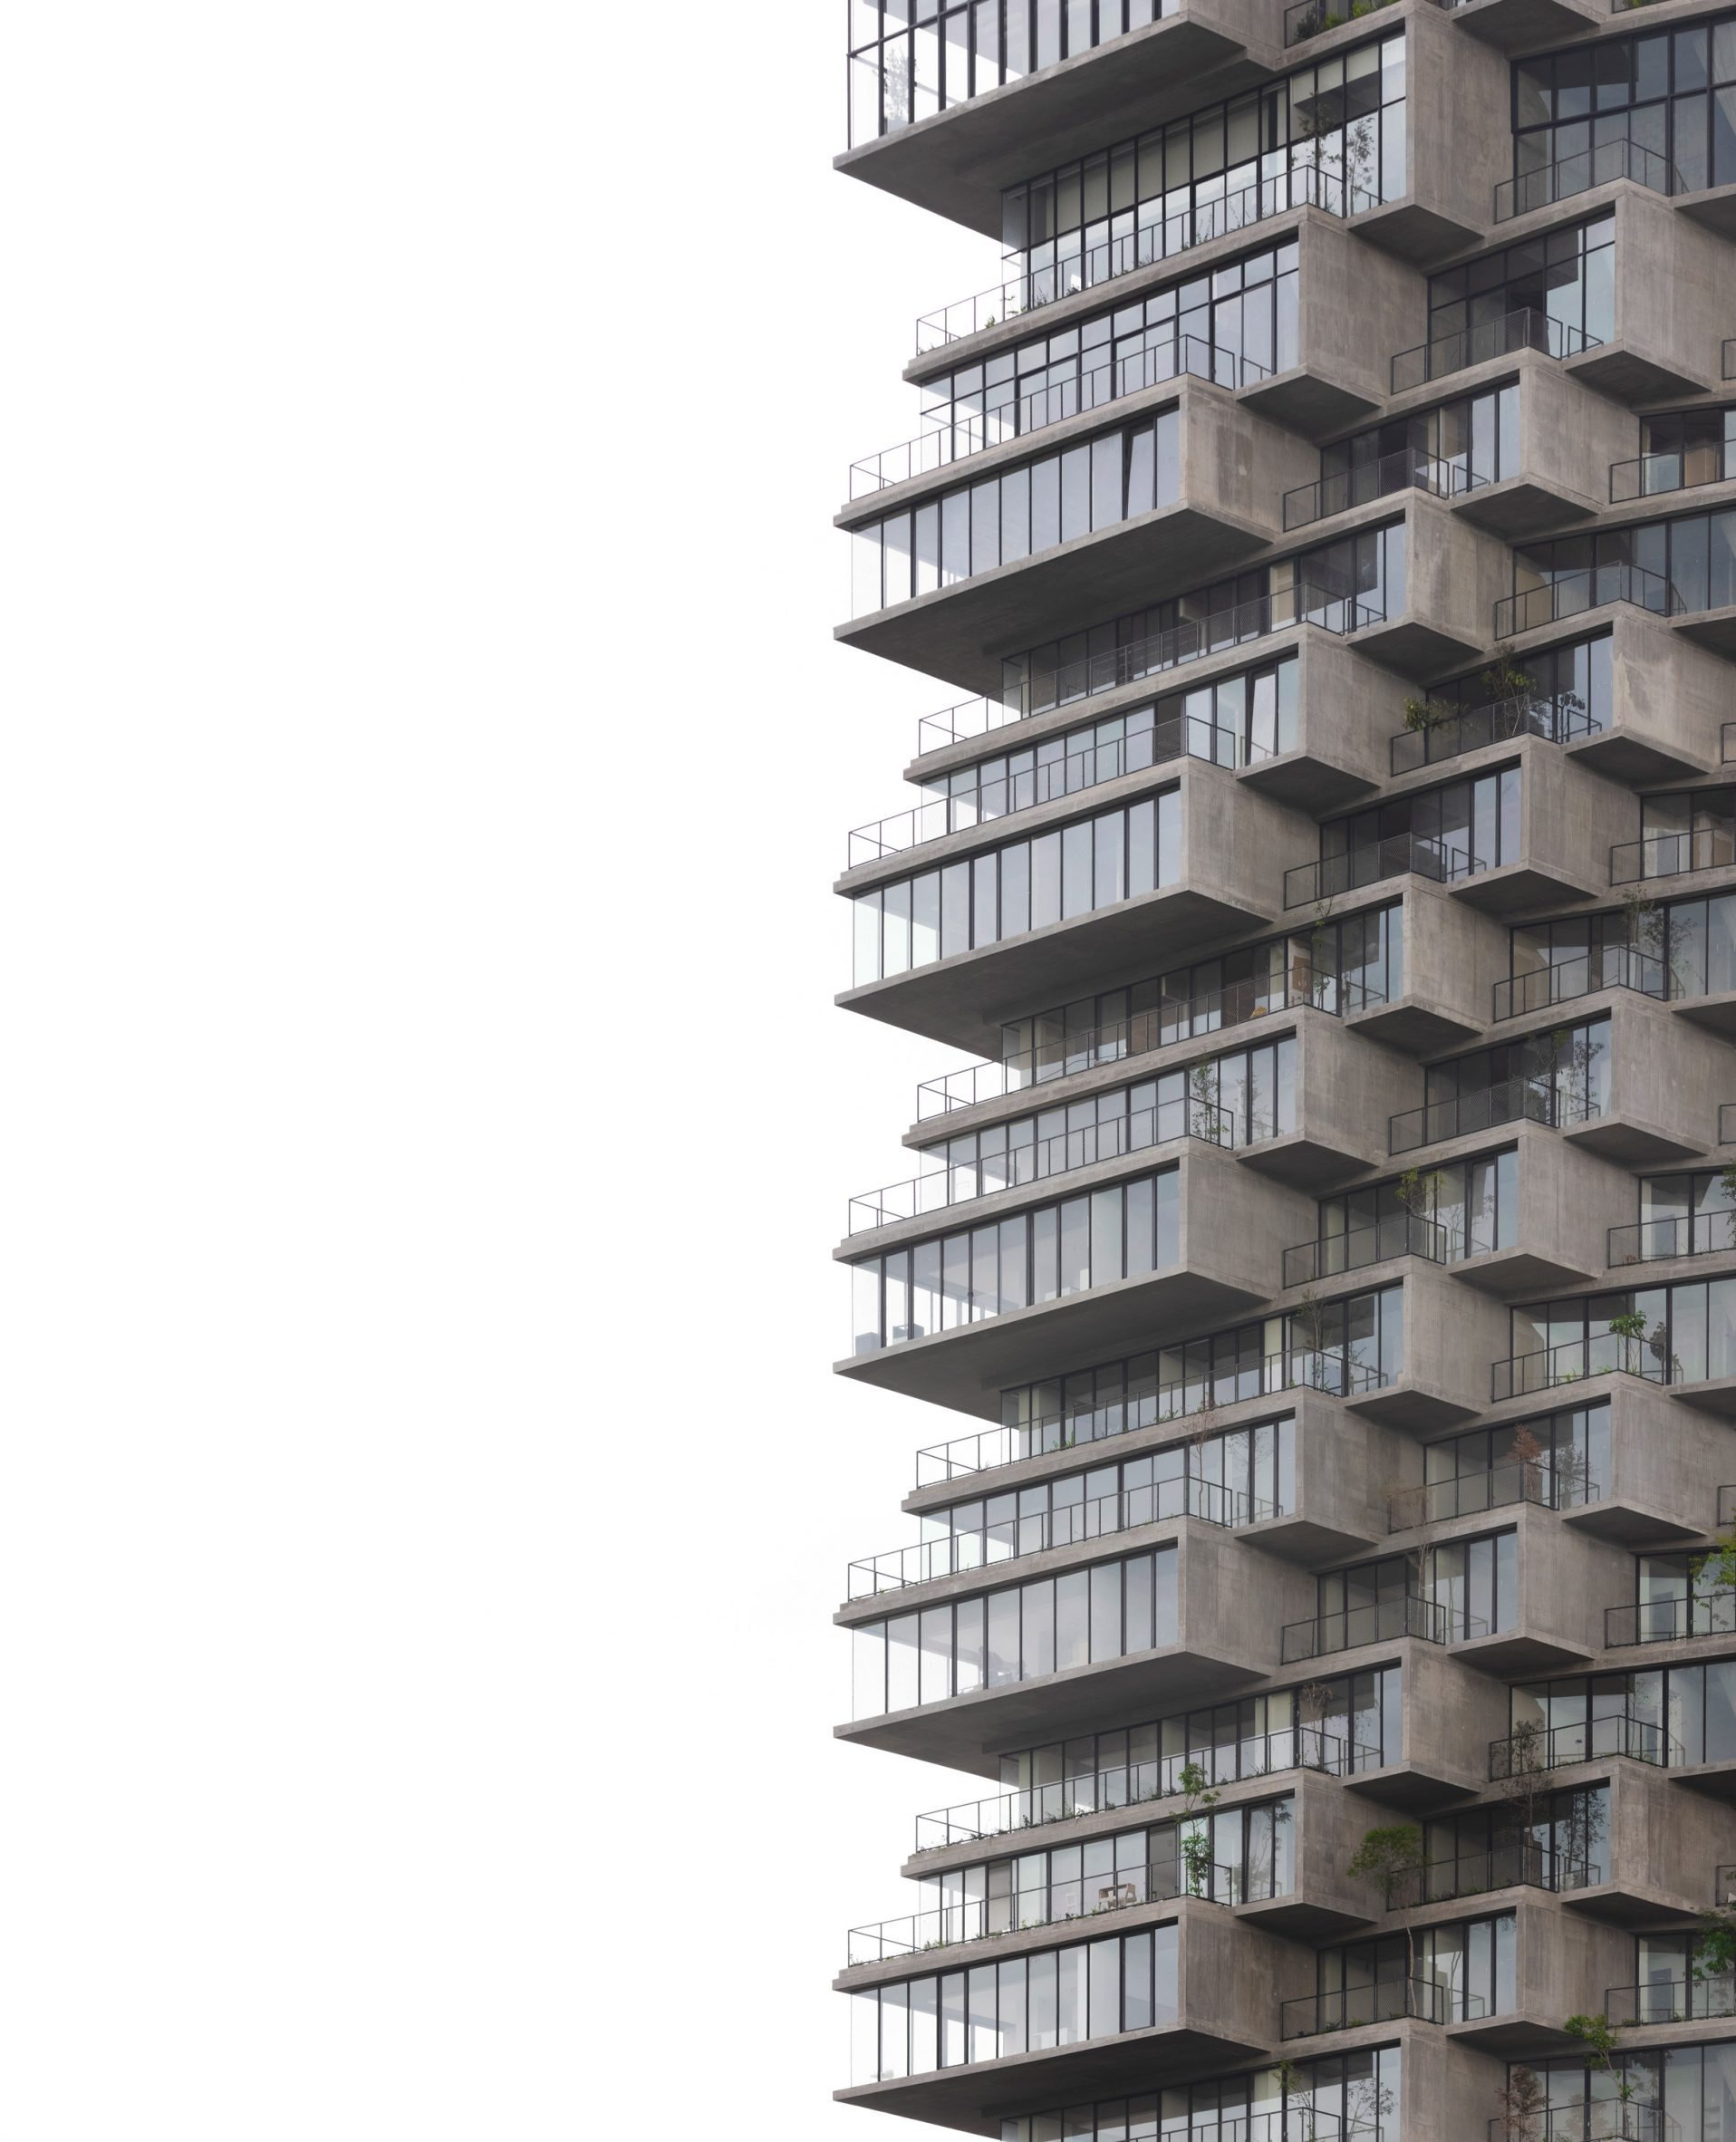 BIG completes Iqon high-rise in Quito with pixelated facade